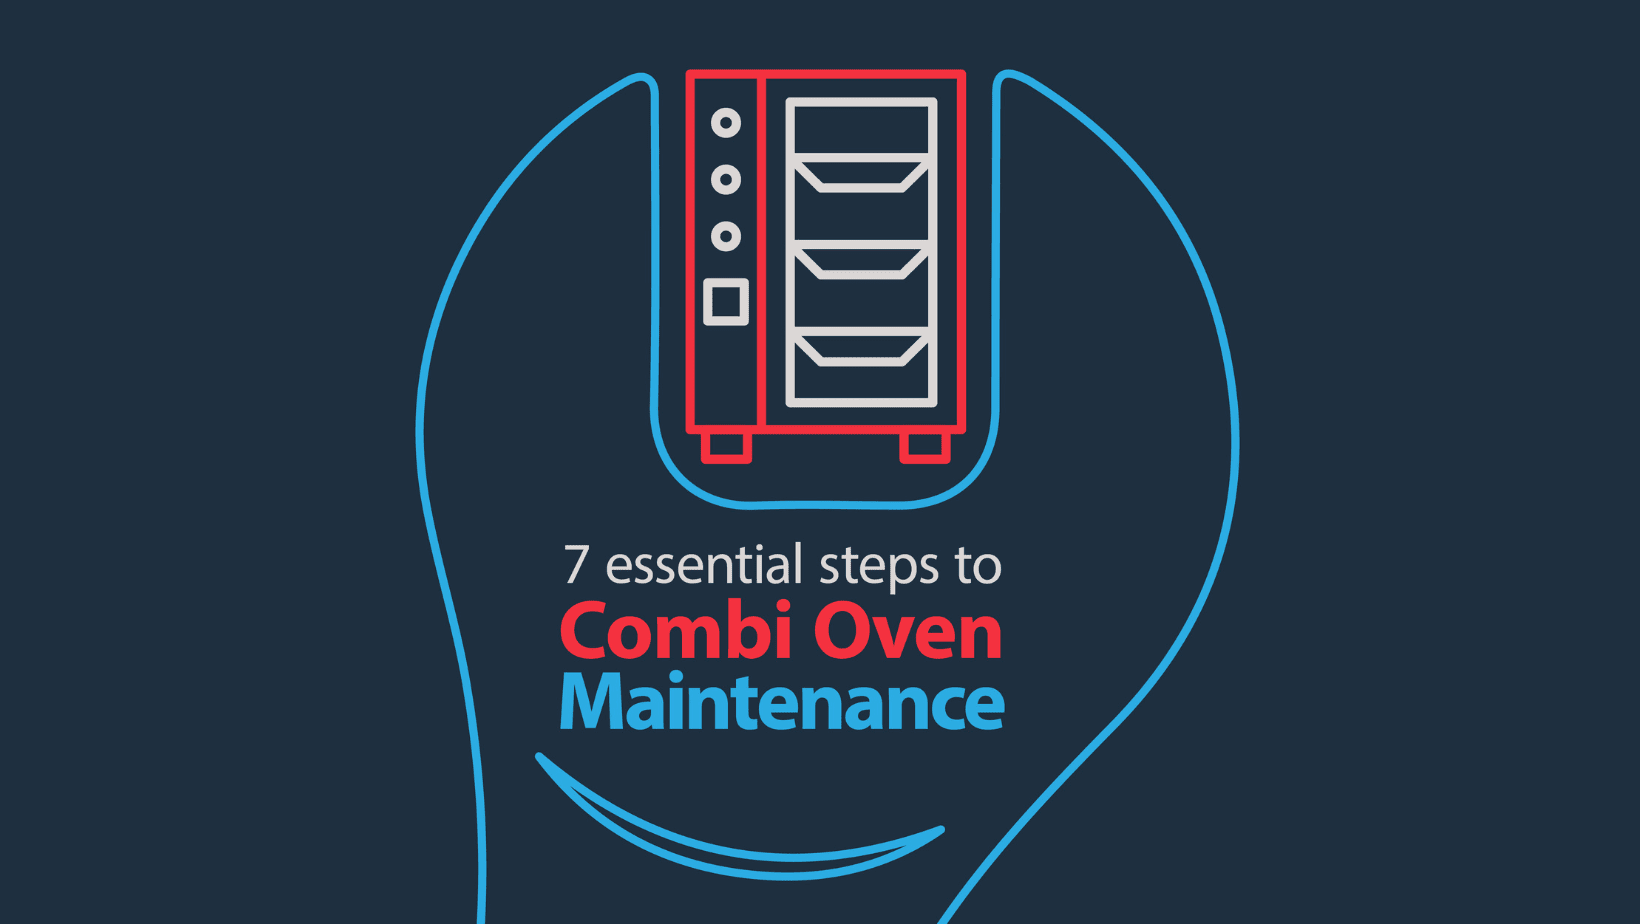 7 Essential Steps for Combi Oven Maintenance